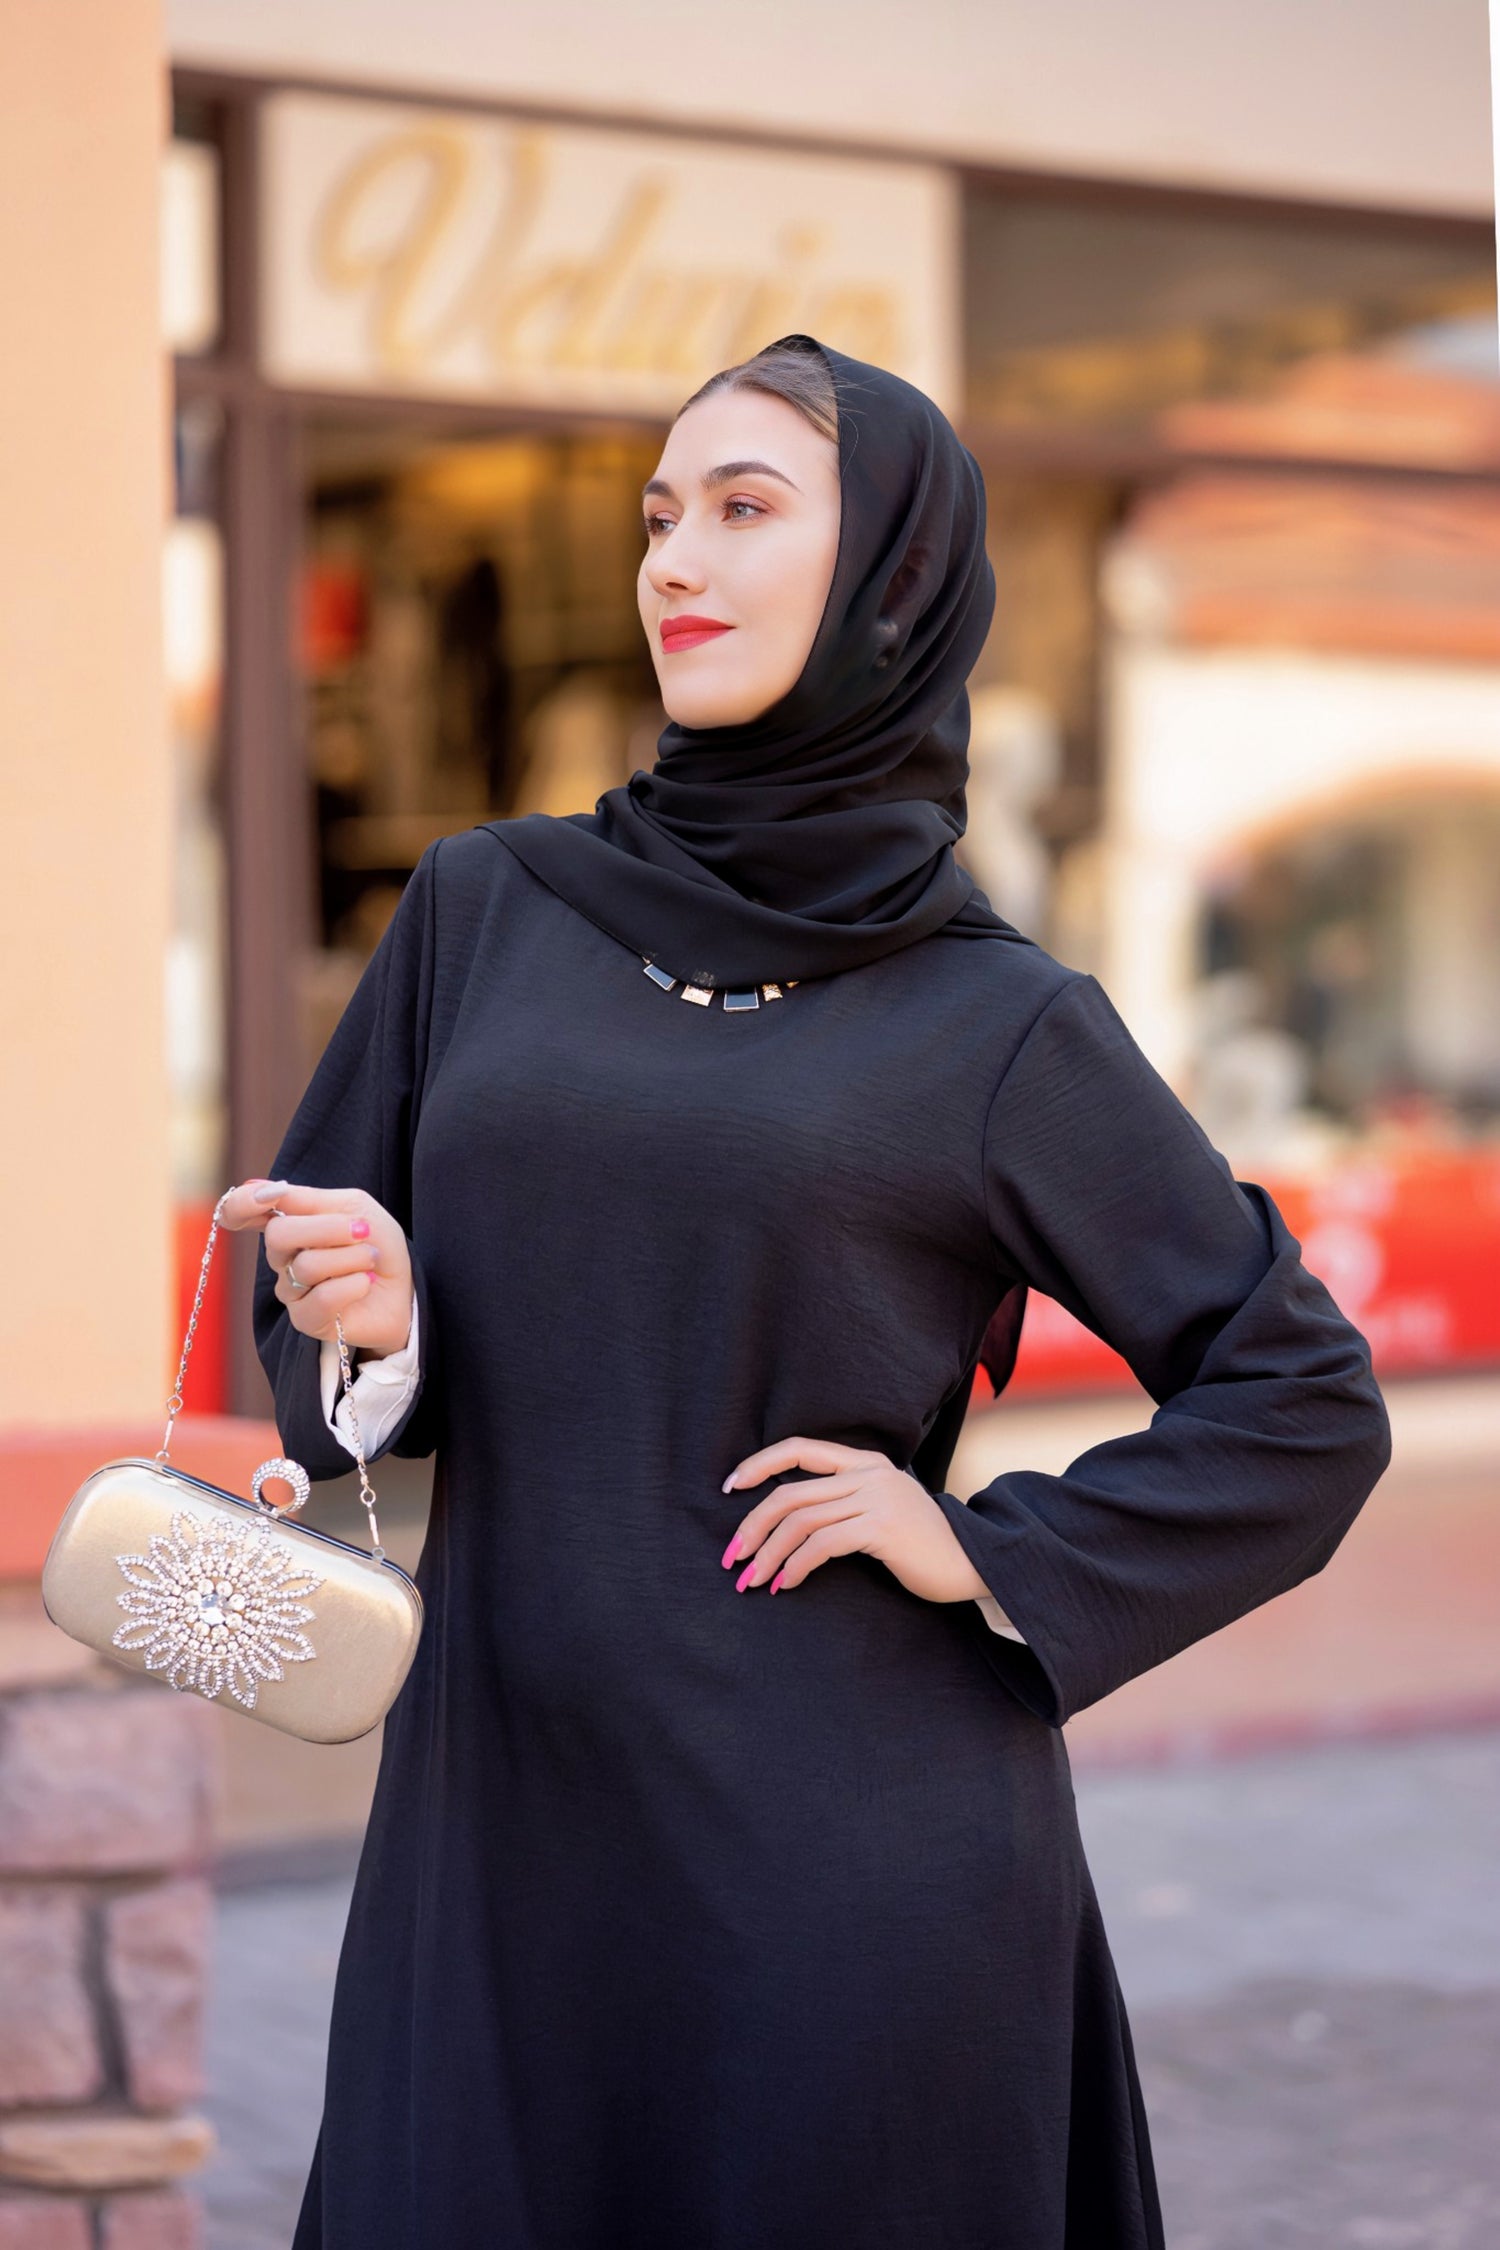 The Benefits of Wearing Islamic Clothing